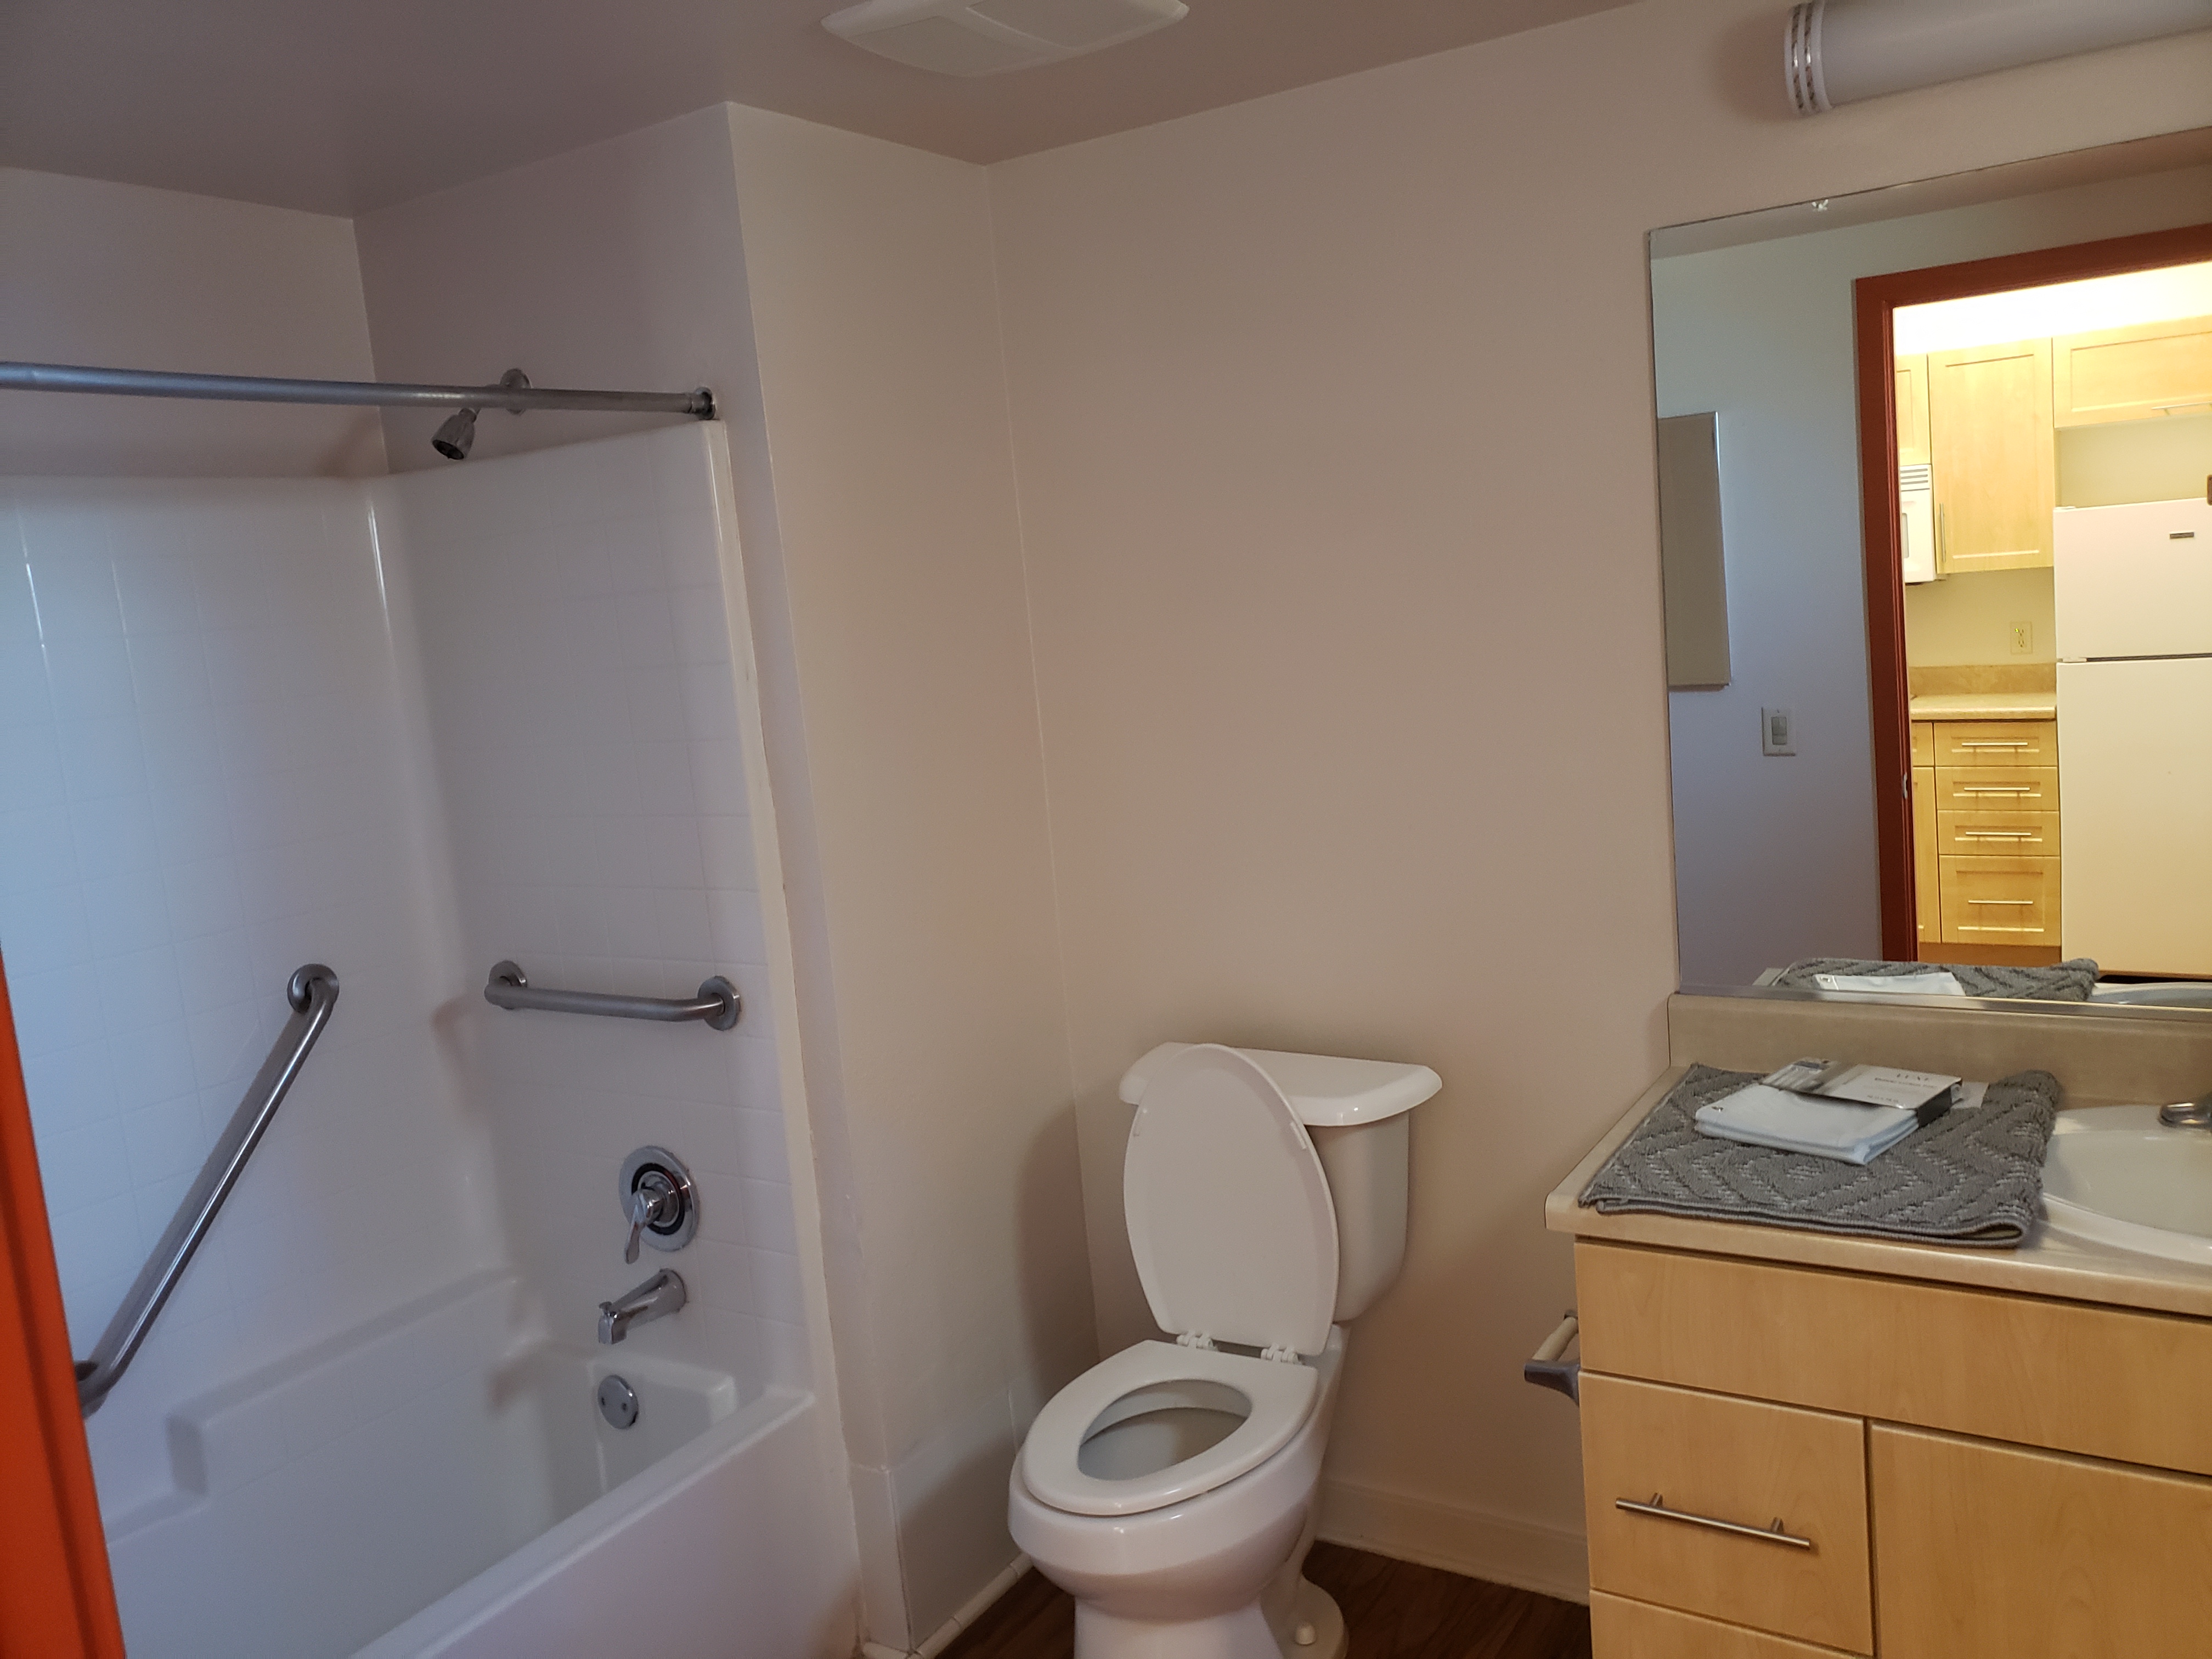 view of bathroom. Shower has tub with two grab bars installed. Large mirror and cabinets